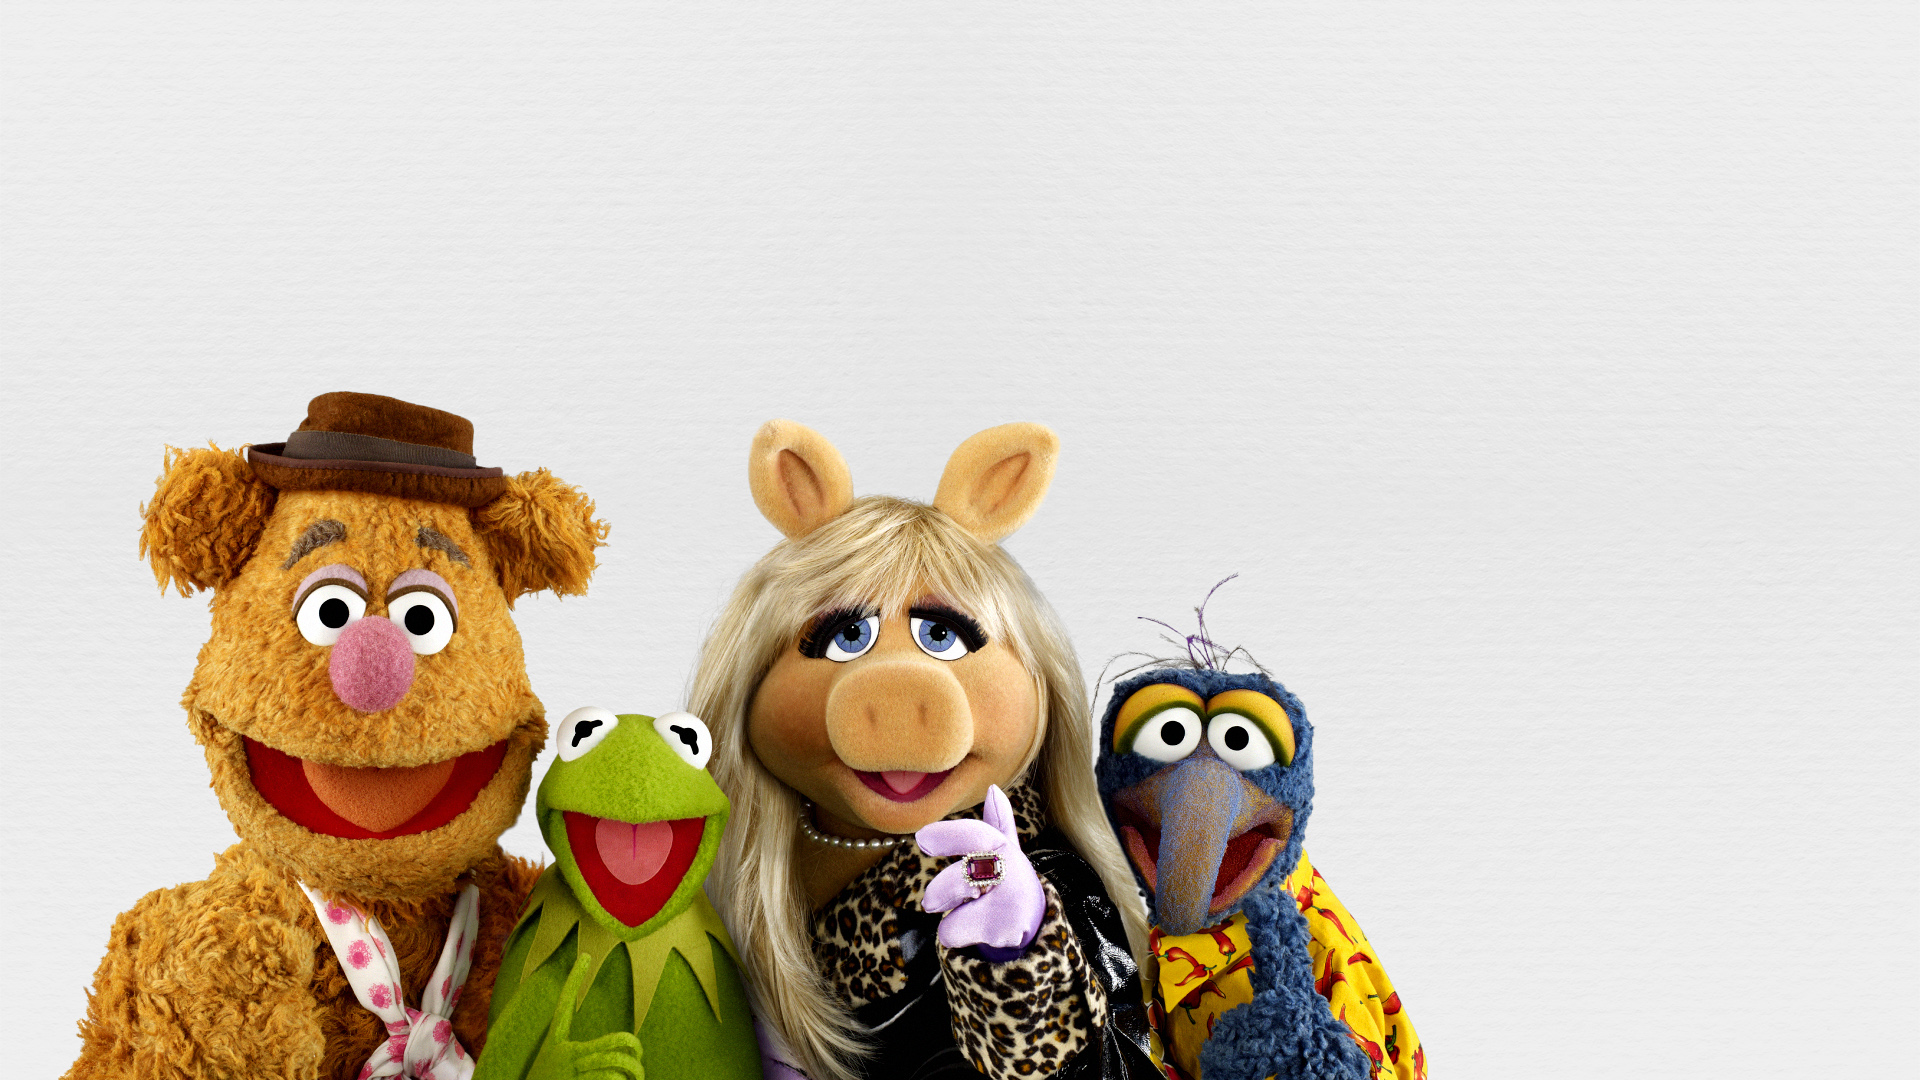 The Muppets TV Show Kermit The Frog 1920x1080